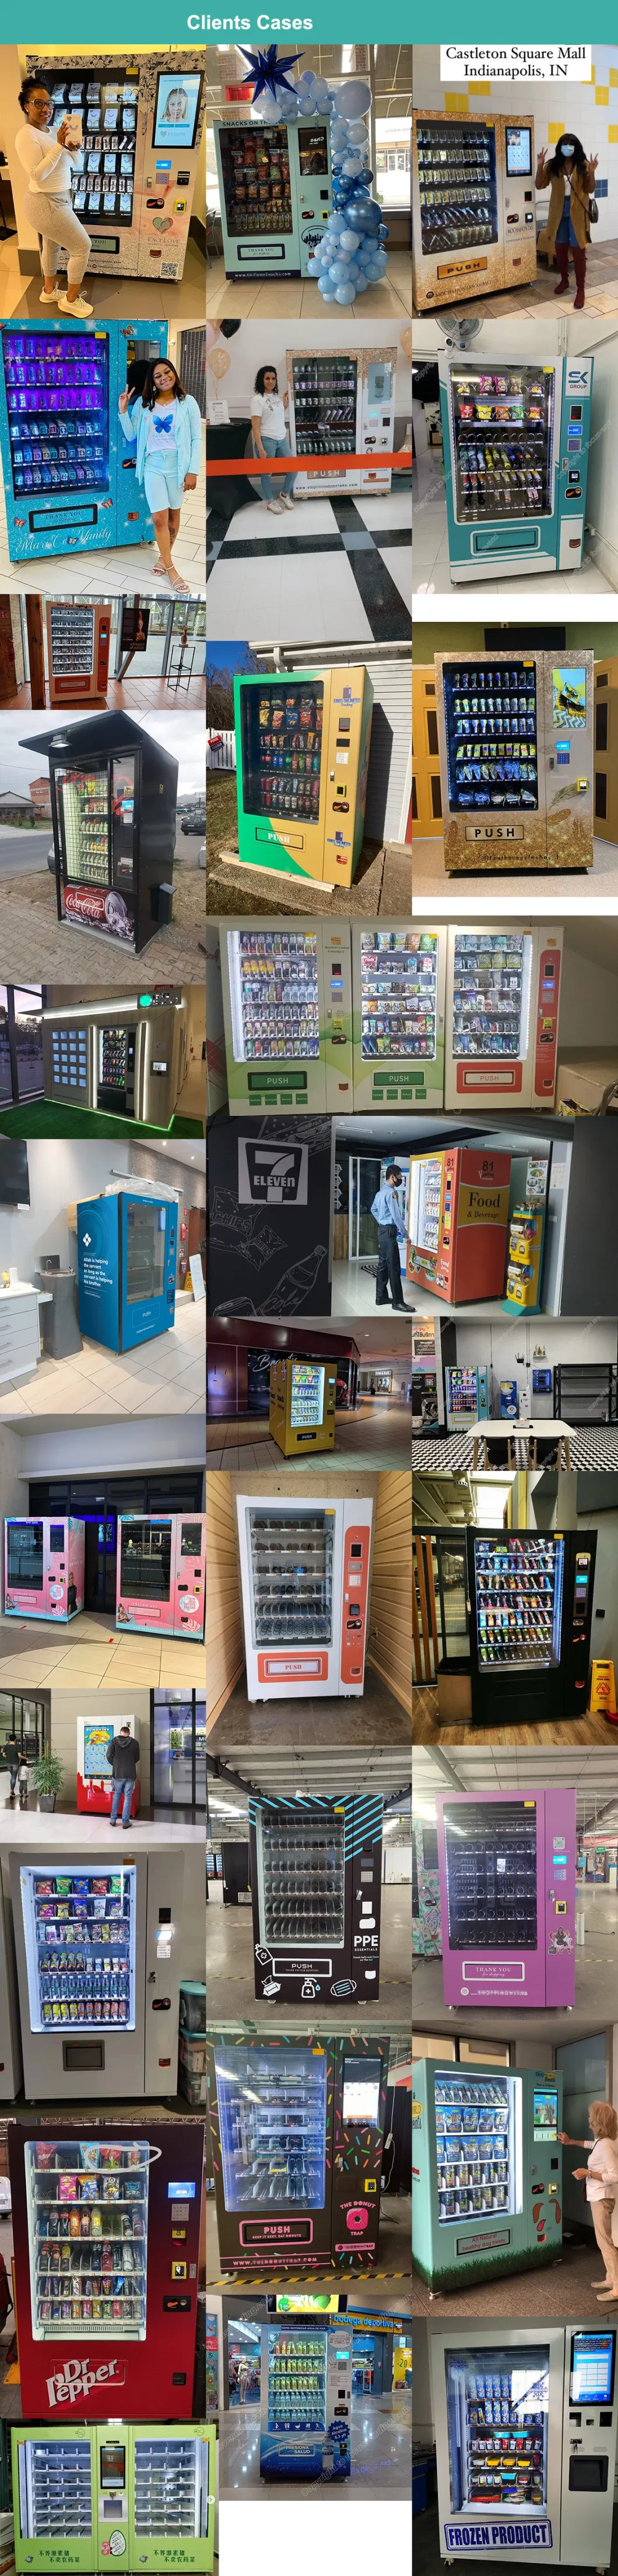 Medical Vending Machines Accept Cion/Bill/Cards Payment for Medical Items